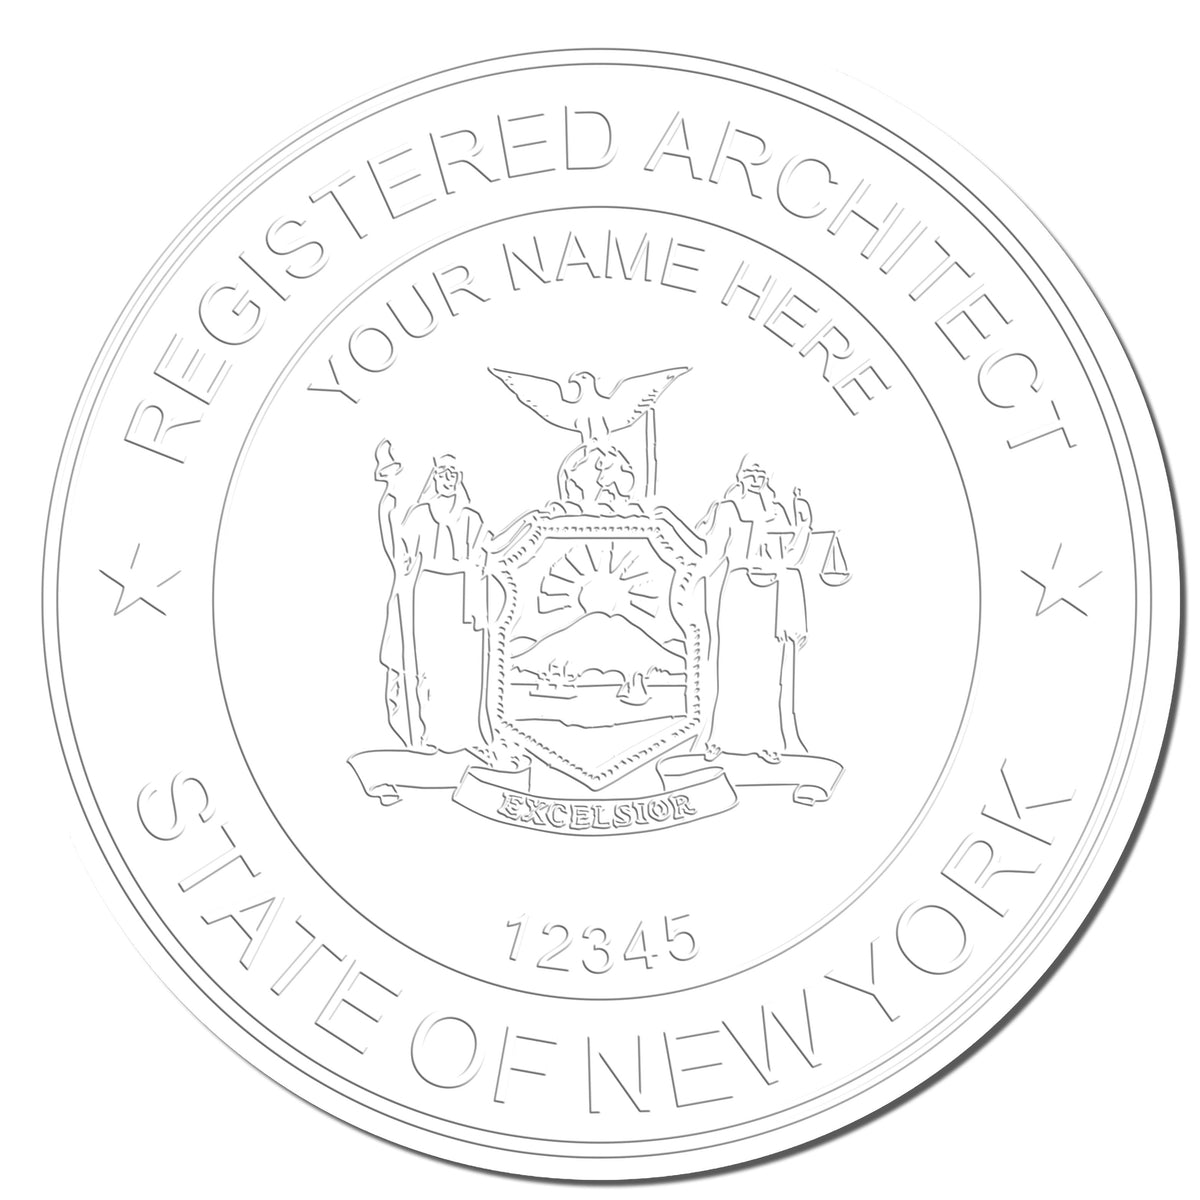 This paper is stamped with a sample imprint of the Hybrid New York Architect Seal, signifying its quality and reliability.